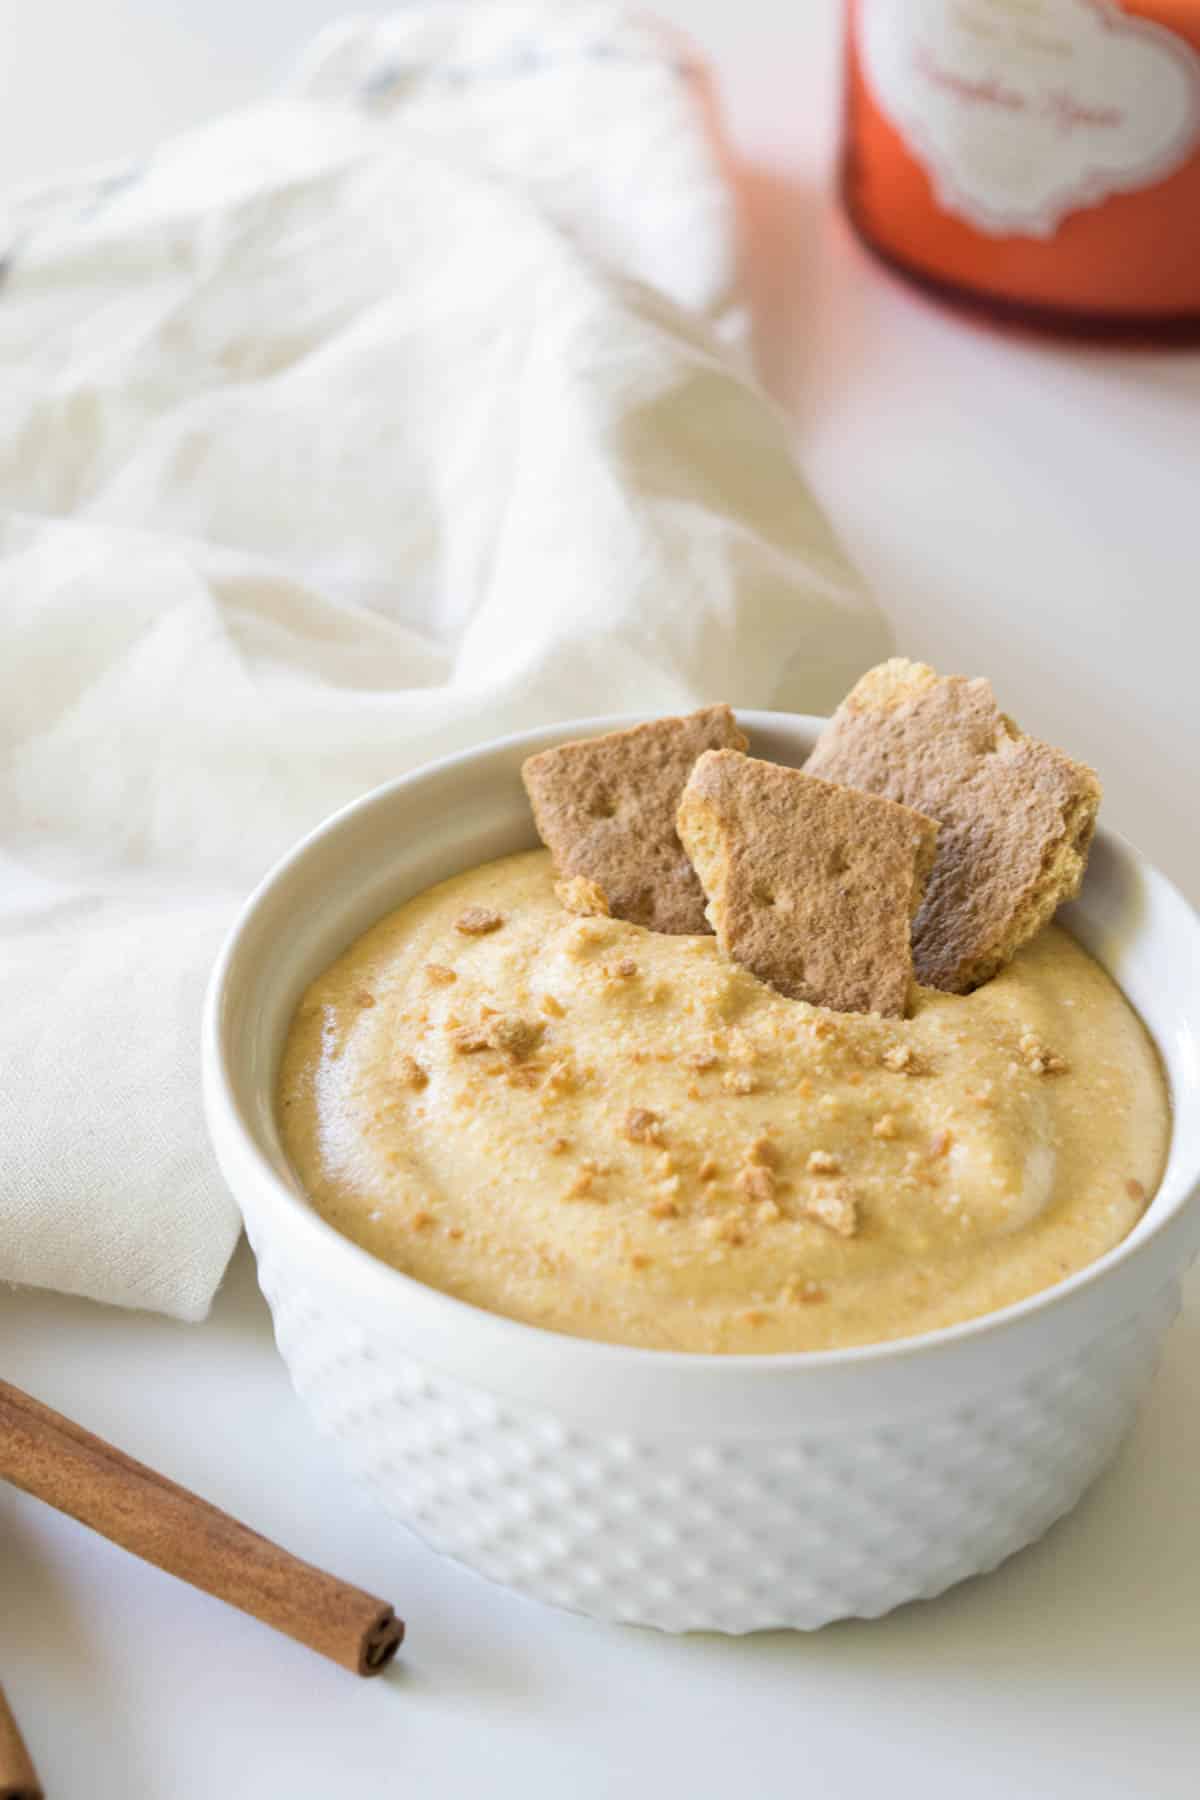 Make this protein-packed pumpkin pie mousse recipe when you want to kick sugar cravings in the butt and still eat healthy!